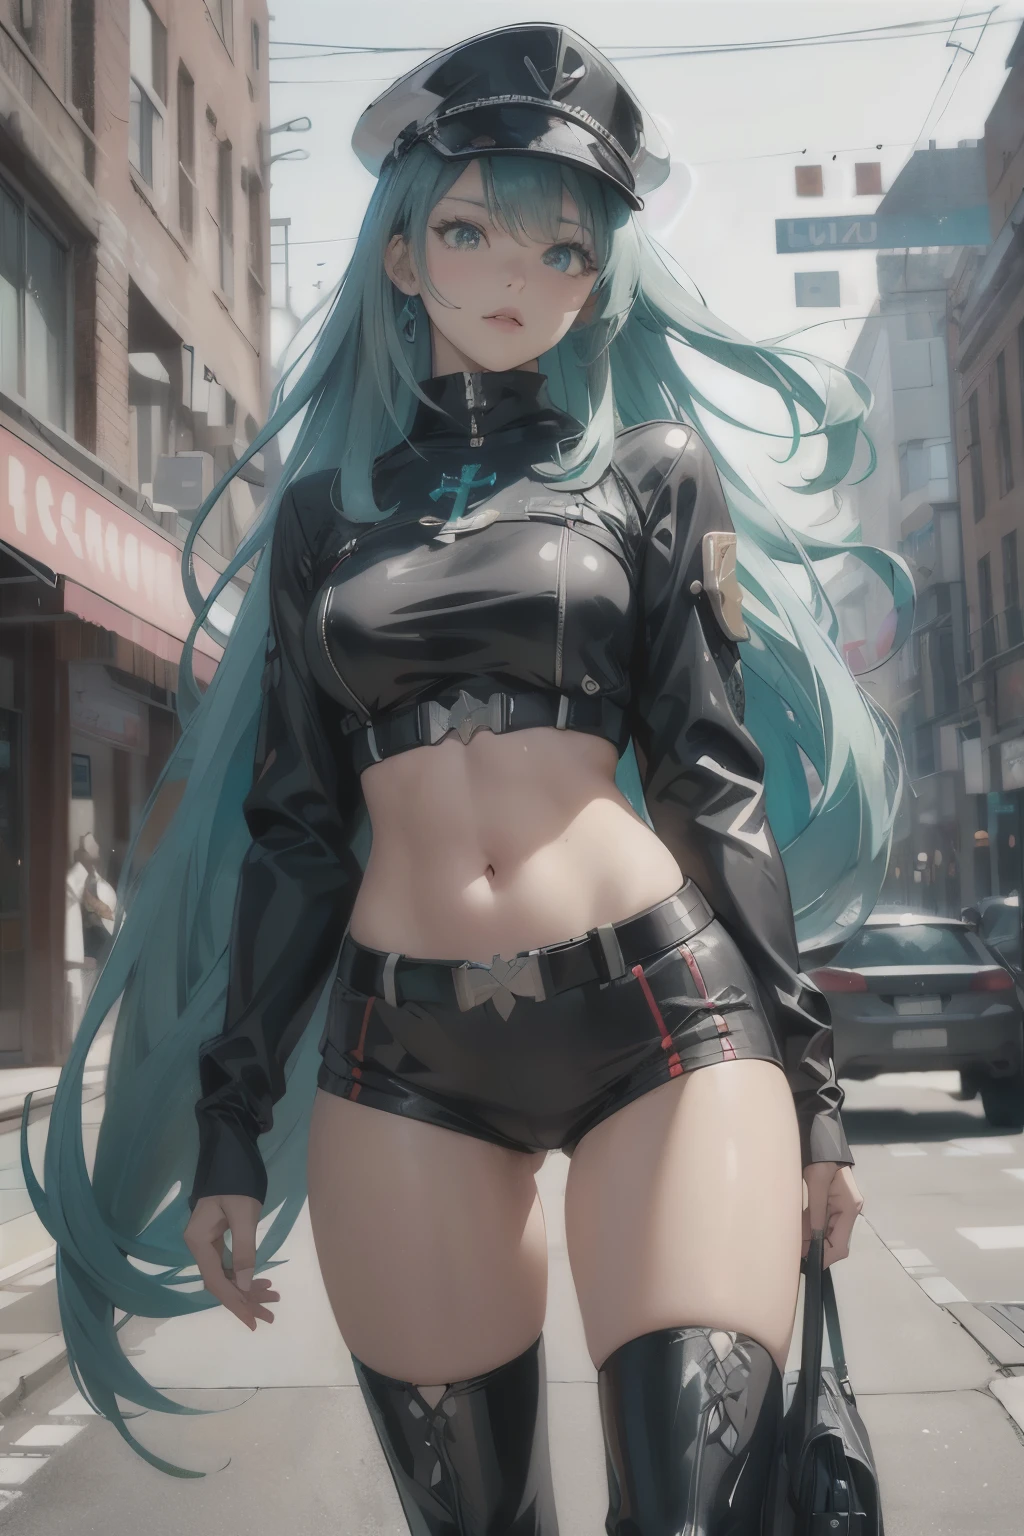 Anime, Girl, (((1girl))), (((Waifu, Xenoblade Chronicles 2, Pneuma Waifu))), Techwear, (((Seafoam Green Hair, Long Hair))), ((Seafoam Green Eyes eyes:1.3, Upturned Eyes: 1, Perfect Eyes, Beautiful Detailed Eyes, Gradient eyes: 1, Finely Detailed Beautiful Eyes: 1, Symmetrical Eyes: 1, Big Highlight On Eyes: 1.2)), (((Lustrous Skin: 1.5, Bright Skin: 1.5, Skin Fair, Shiny Skin, Very Shiny Skin, Shiny Body, Plastic Glitter Skin, Exaggerated Shiny Skin, Illuminated Skin))), (Detailed Body, (Detailed Face)), Young, Idol Pose, (Best Quality), Techwear, (((Military Uniform, Miliraty Cap, Military Coat, Thigh-high Heeled Boots))), High Resolution, Sharp Focus, Ultra Detailed, Extremely Detailed, Extremely High Quality Artwork, (Realistic, Photorealistic: 1.37), 8k_Wallpaper, (Extremely Detailed CG 8k), (Very Fine 8K CG), ((Hyper Super Ultra Detailed Perfect Piece)), (((Flawlessmasterpiece))), Illustration, Vibrant Colors, (Intricate), High Contrast, Selective Lighting, Double Exposure, HDR (High Dynamic Range), Post-processing, Background Blur